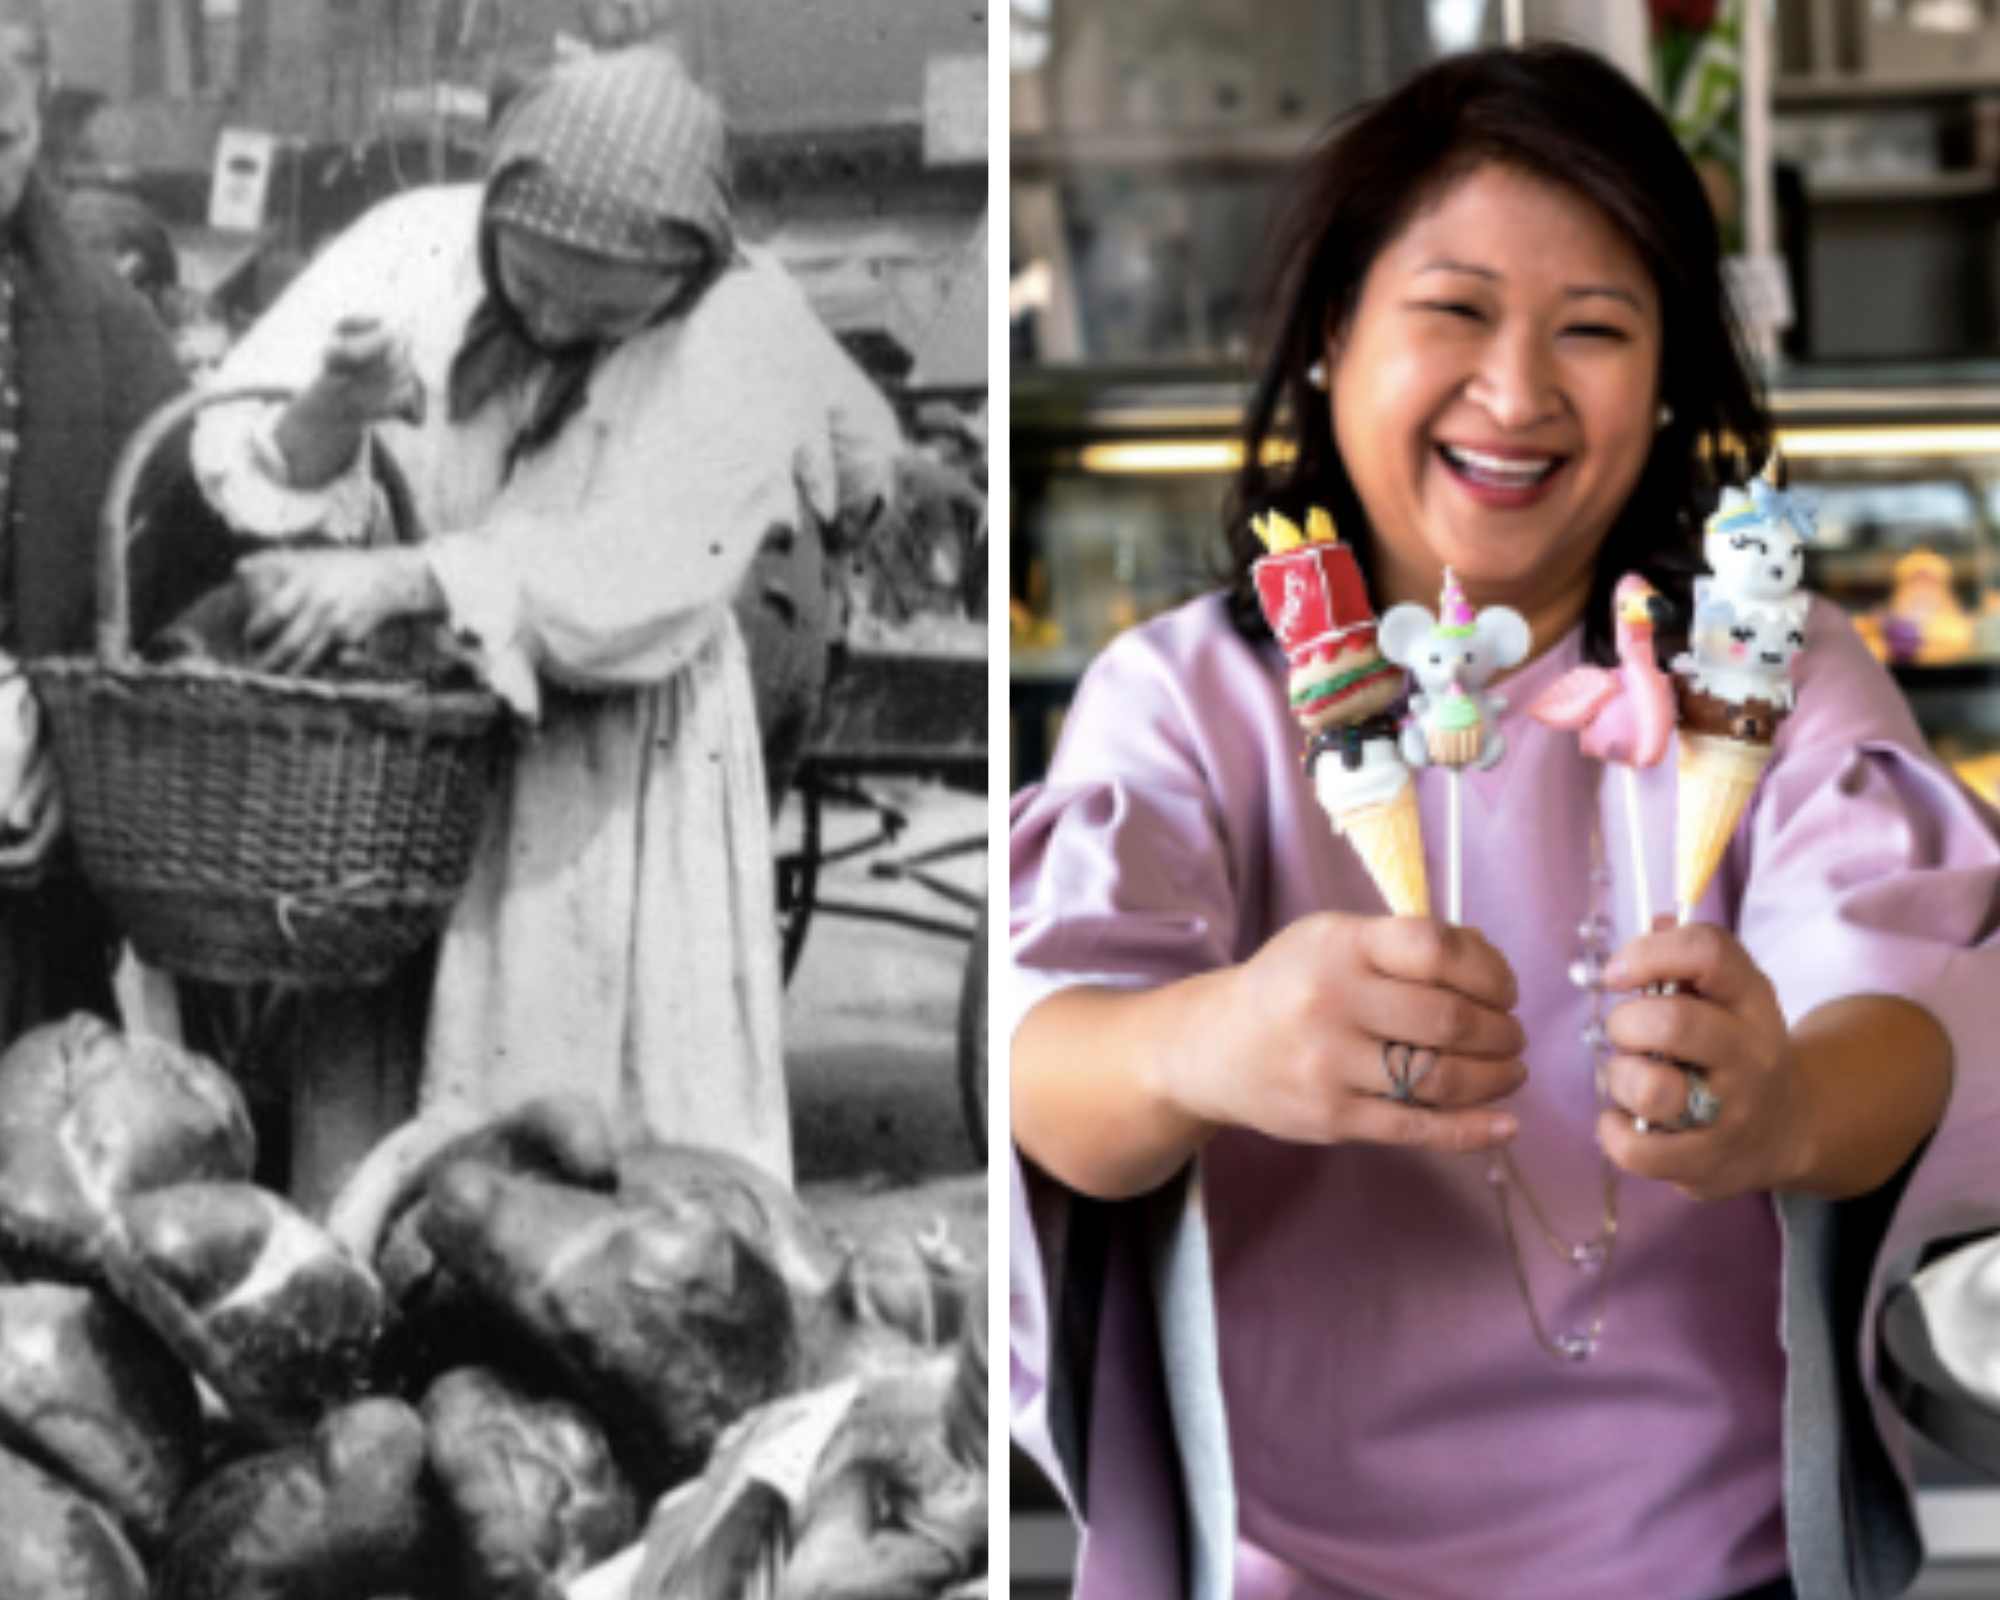 STORIED PAST. Left: Immigrant pushcart food vendors at the Essex Market in the late1800s in New York, from where the likes of pizza and pastrami became ubiquitous in American cuisine. Right: Rebeccaâs Cake Pops, founded by Filipino-American Rebecca Eng. Photo courtesy of Leticia Labre 